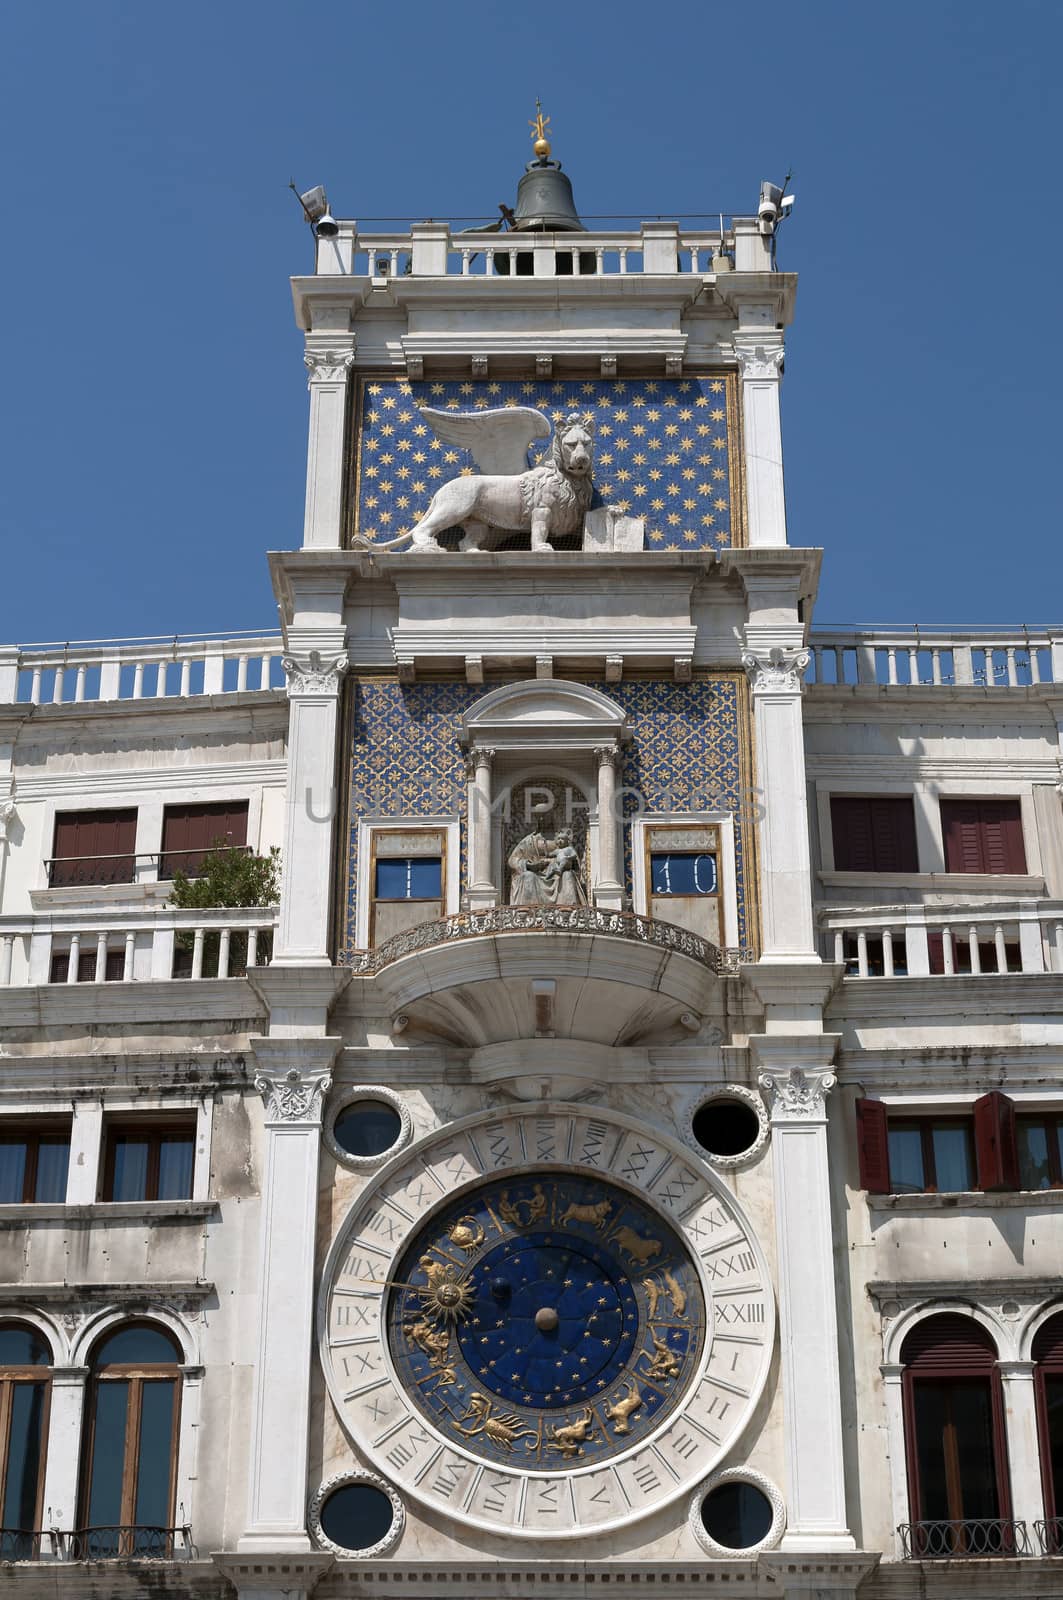 Clock tower building, Venice. by FER737NG